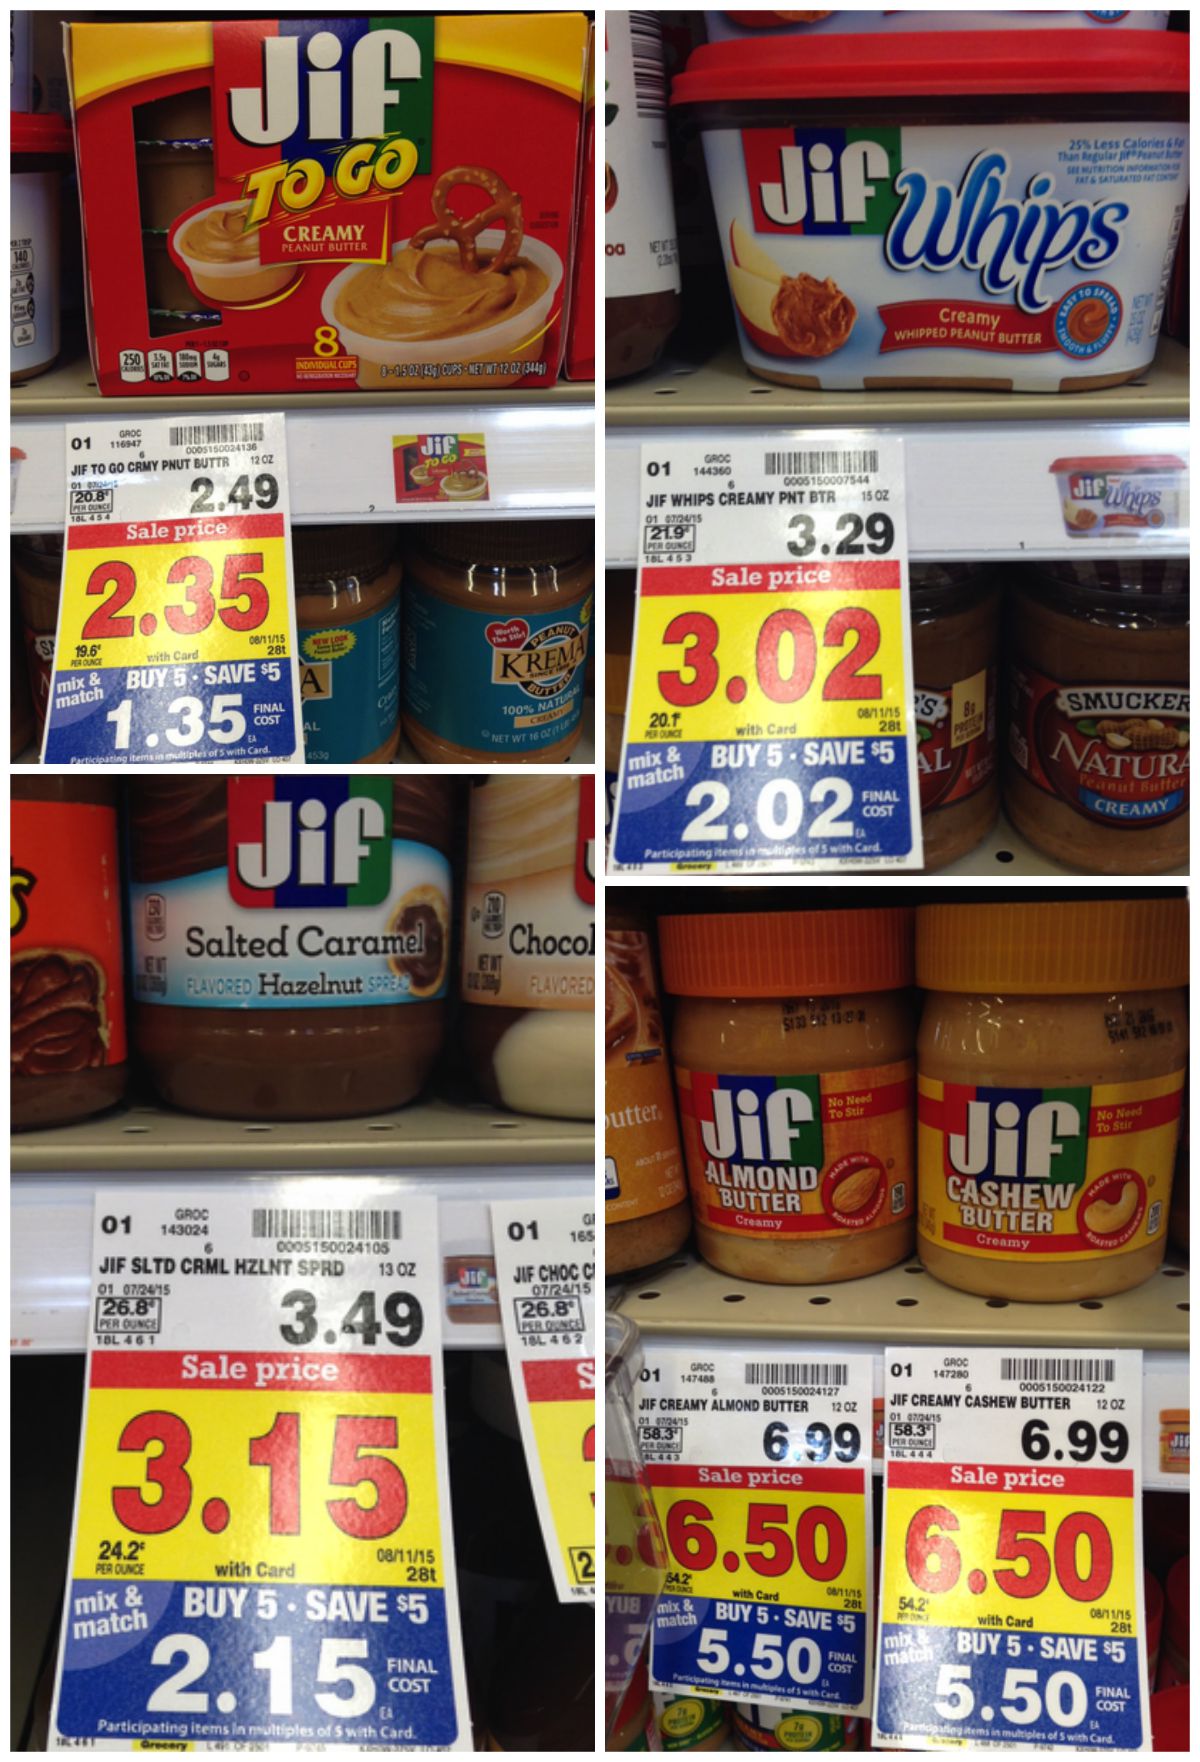 jif-peanut-butter-as-low-as-0-49-with-new-coupon-and-kroger-mega-sale